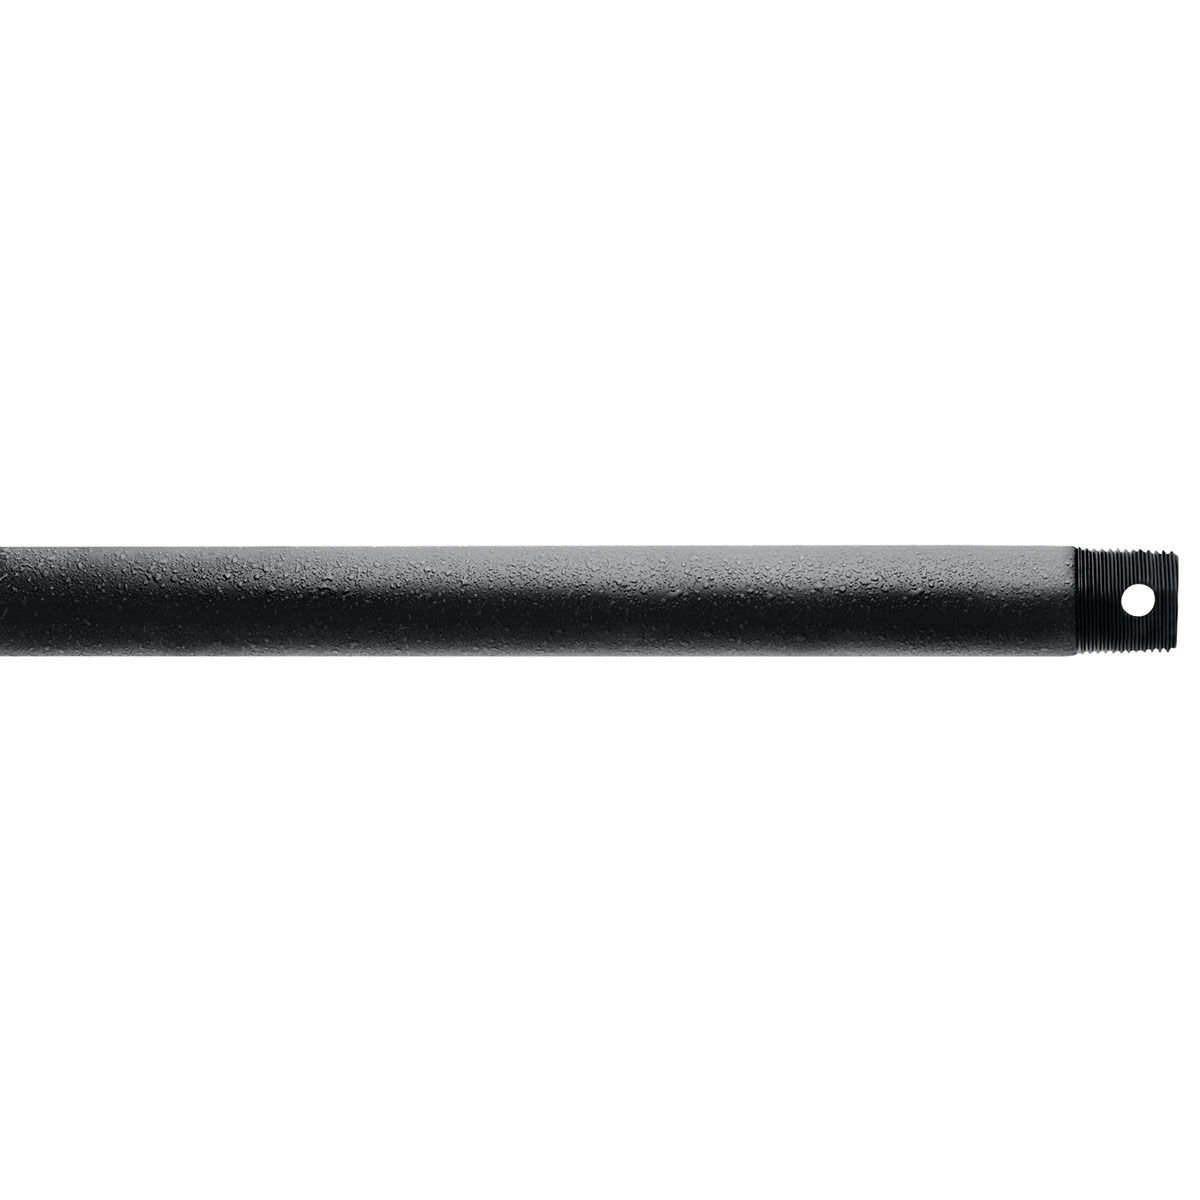 12 inch fan downrod (1 inch O.D.) suggested for 9 foot ceilings in Distressed Black